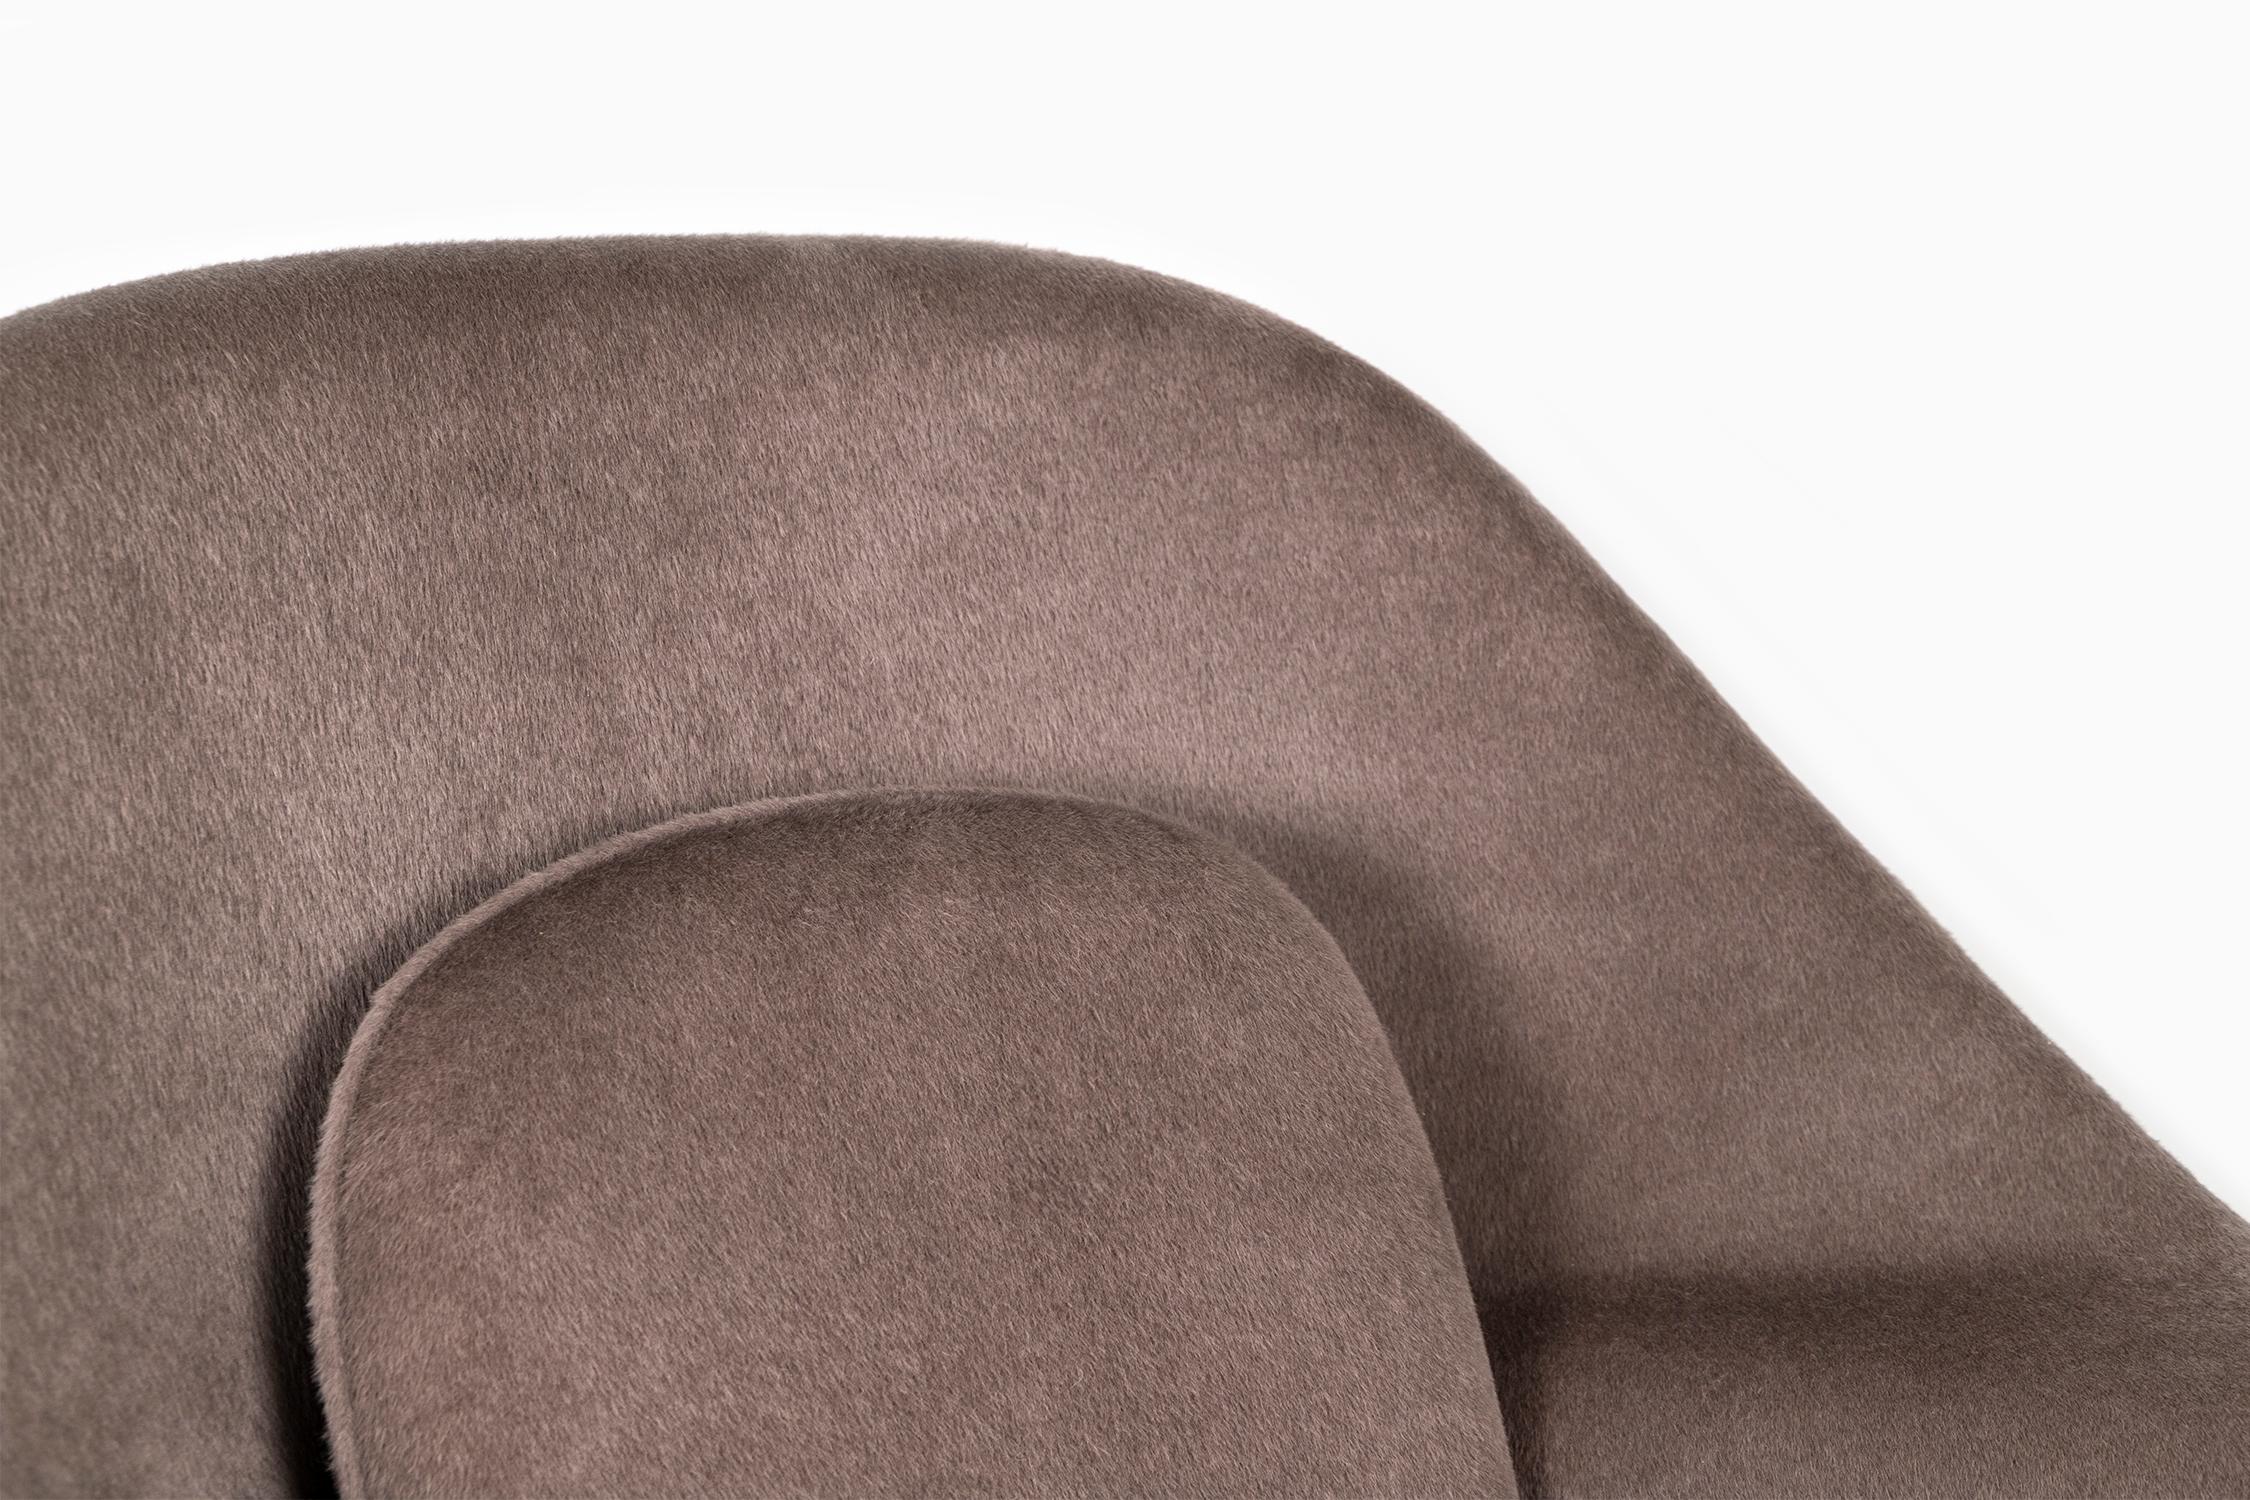 Knoll Medium Womb Chair Upholstered in Alpaca 3